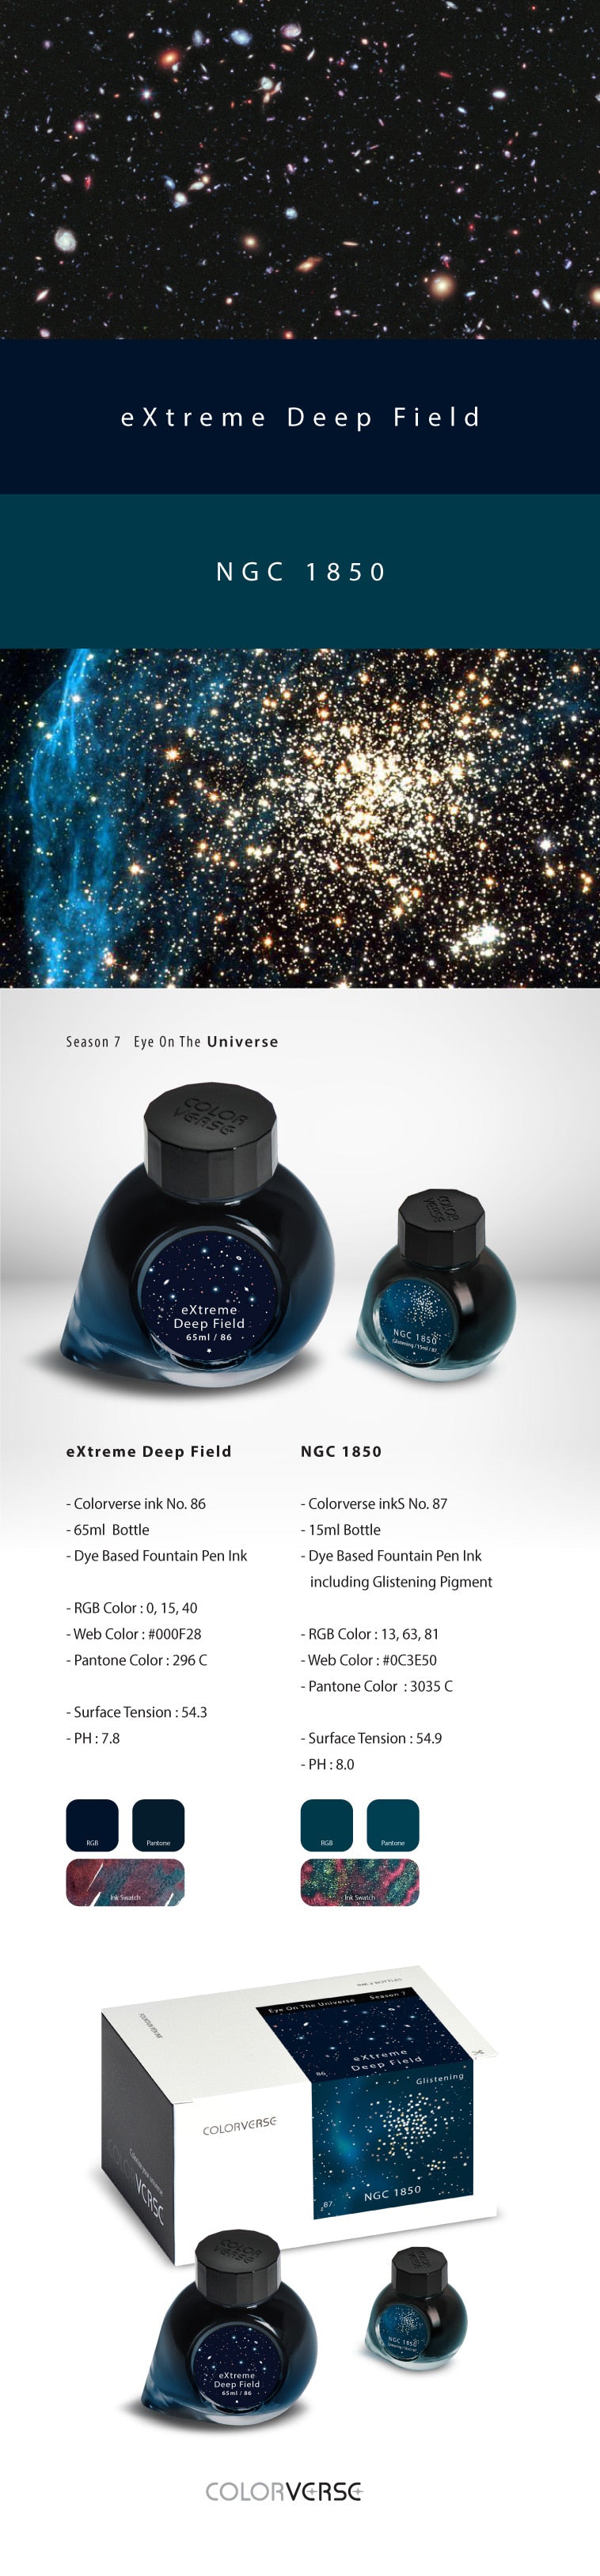 Colorverse 86 & 87 eXtreme Deep Field & NGC 1850